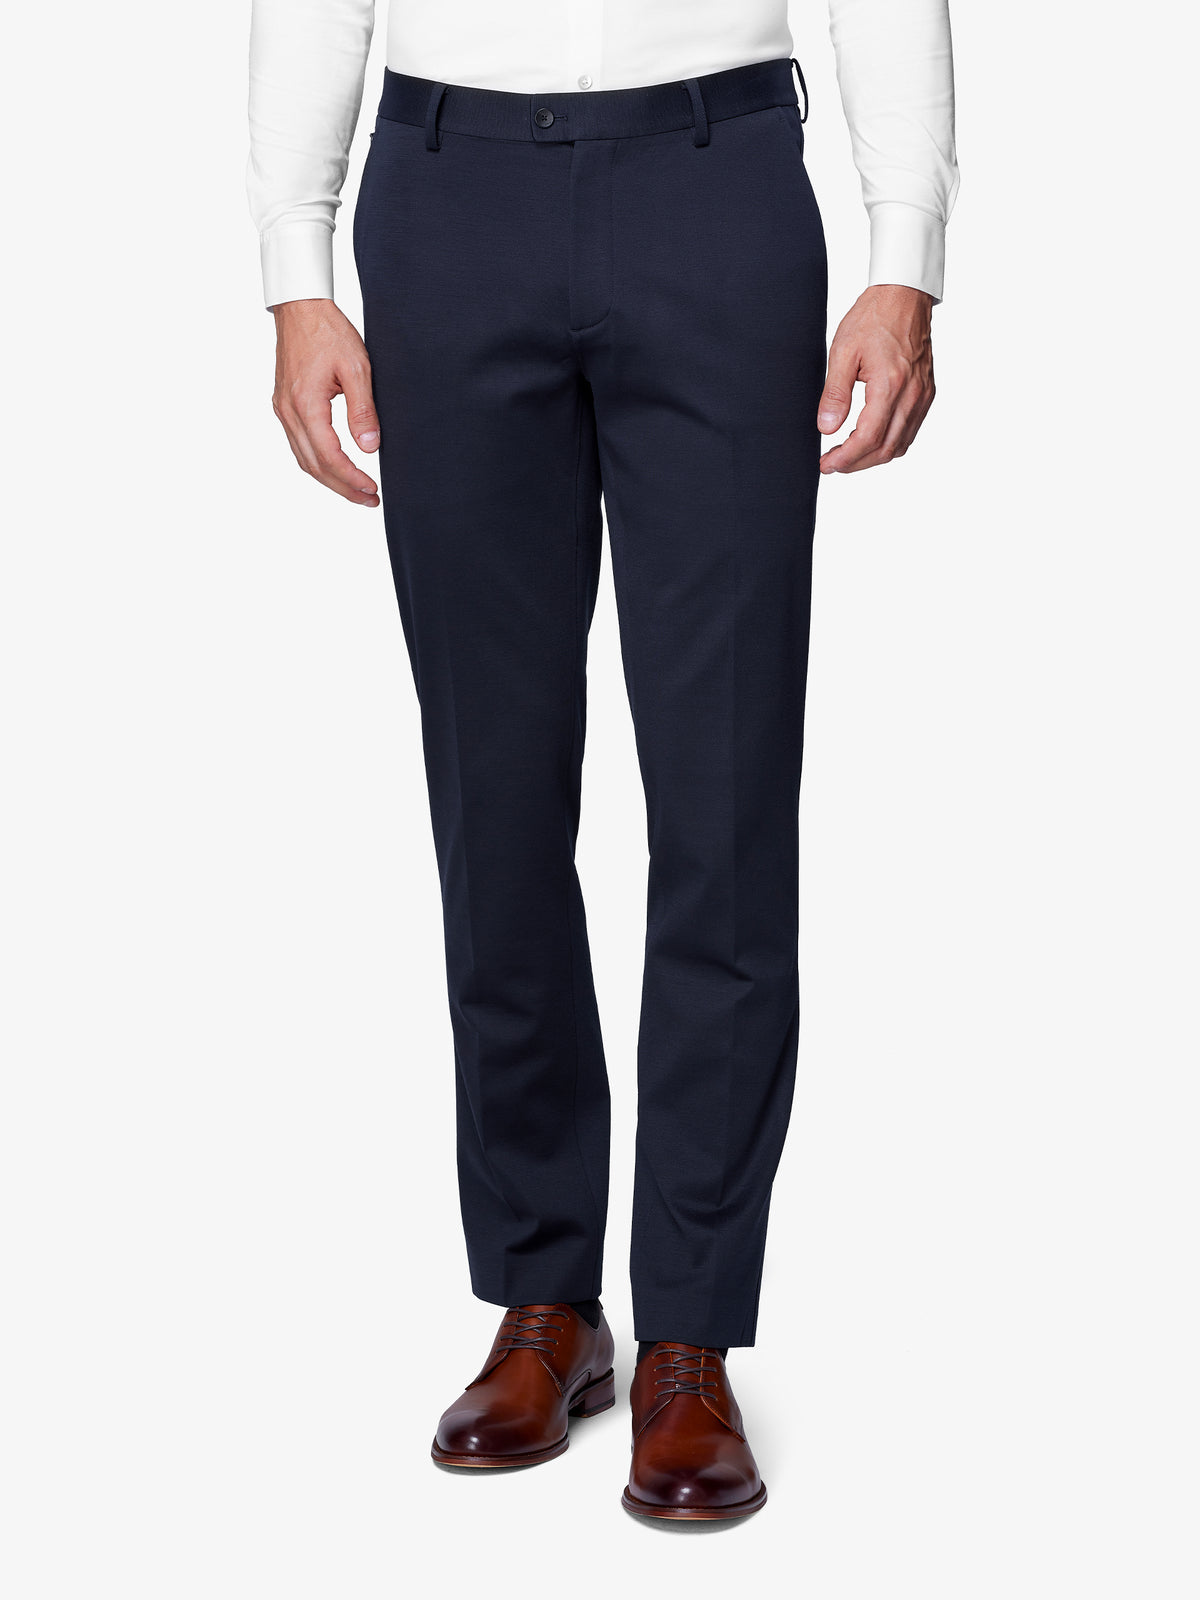 Men’s Stretch Suit Pants | Ultimate Comfort Trousers & Chinos